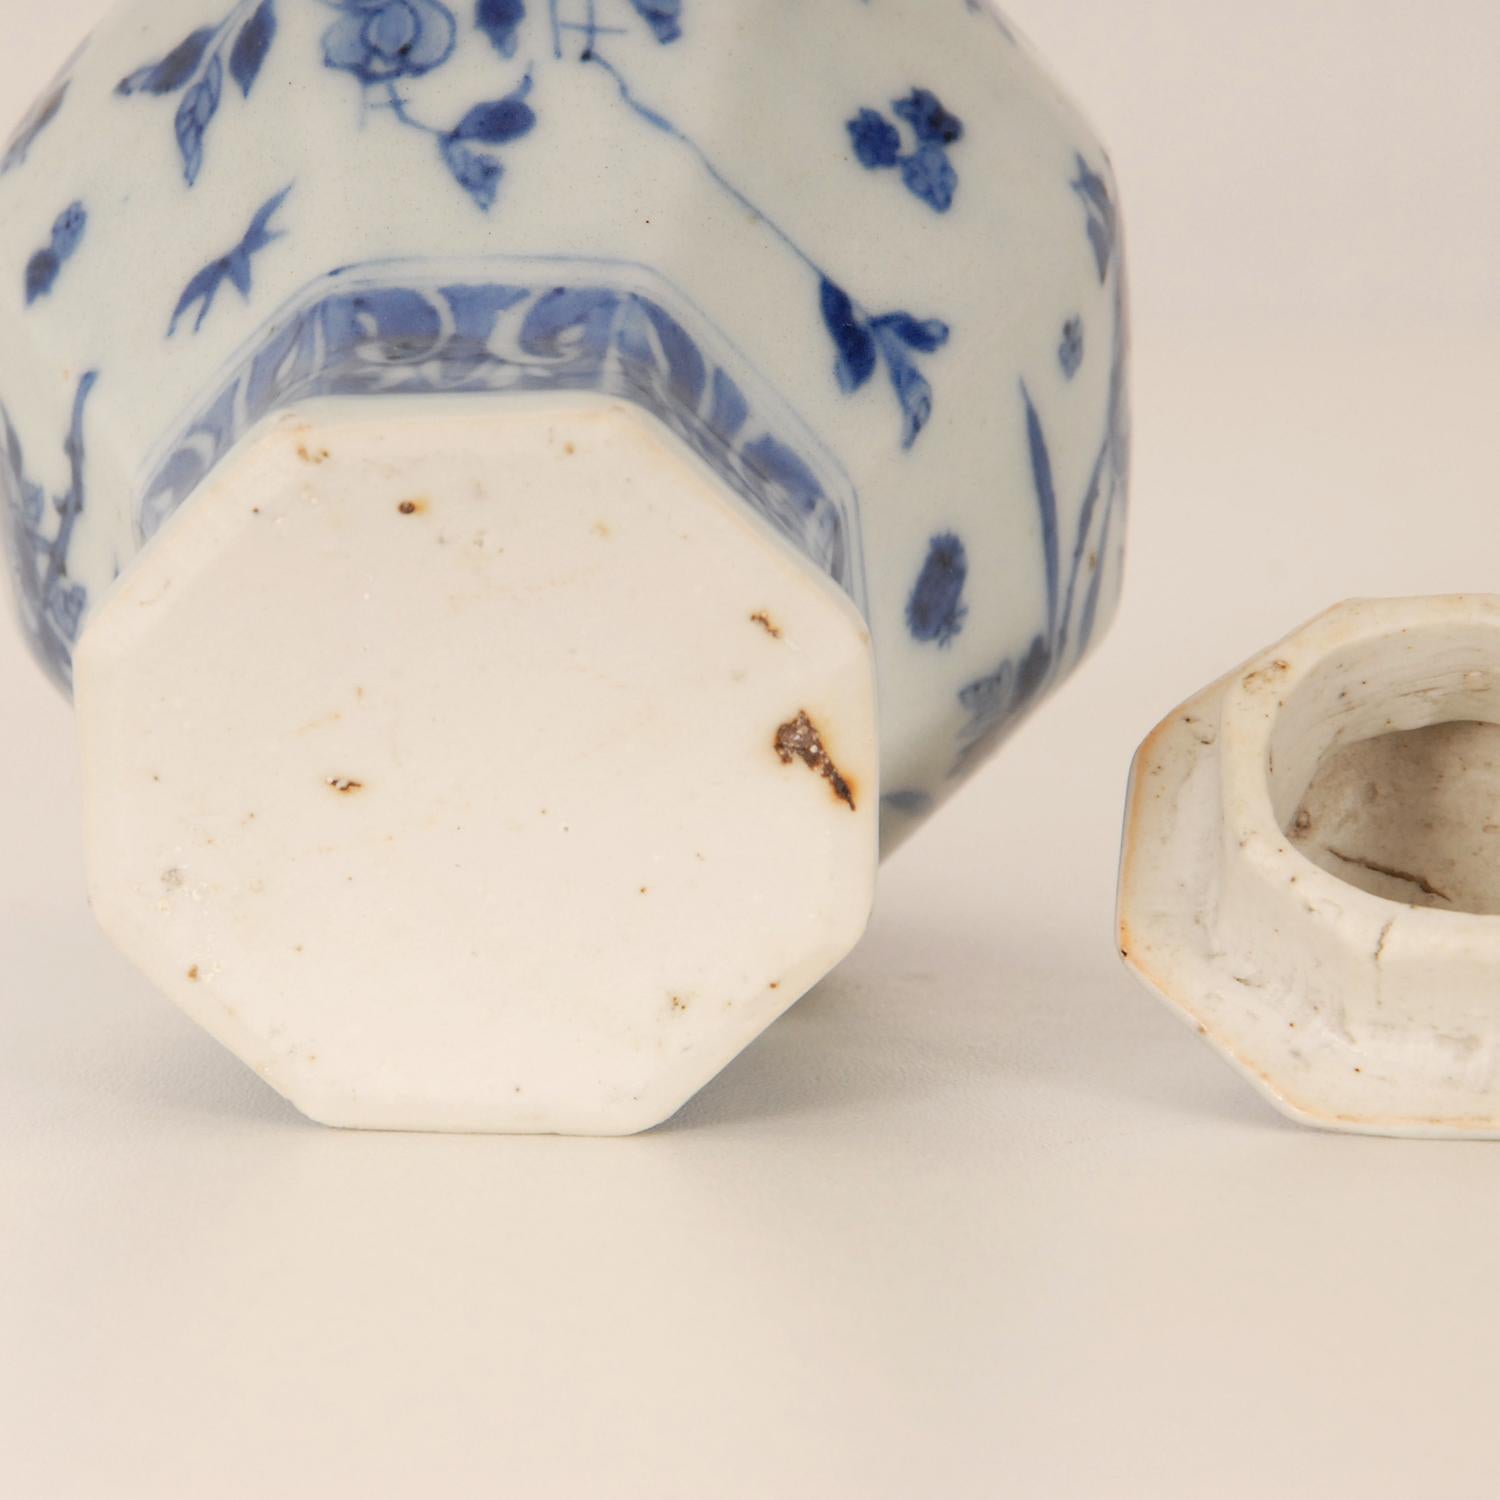 17th century Chinese Ming Porcelain Ceramic Blue and White Vase Covered For Sale 4